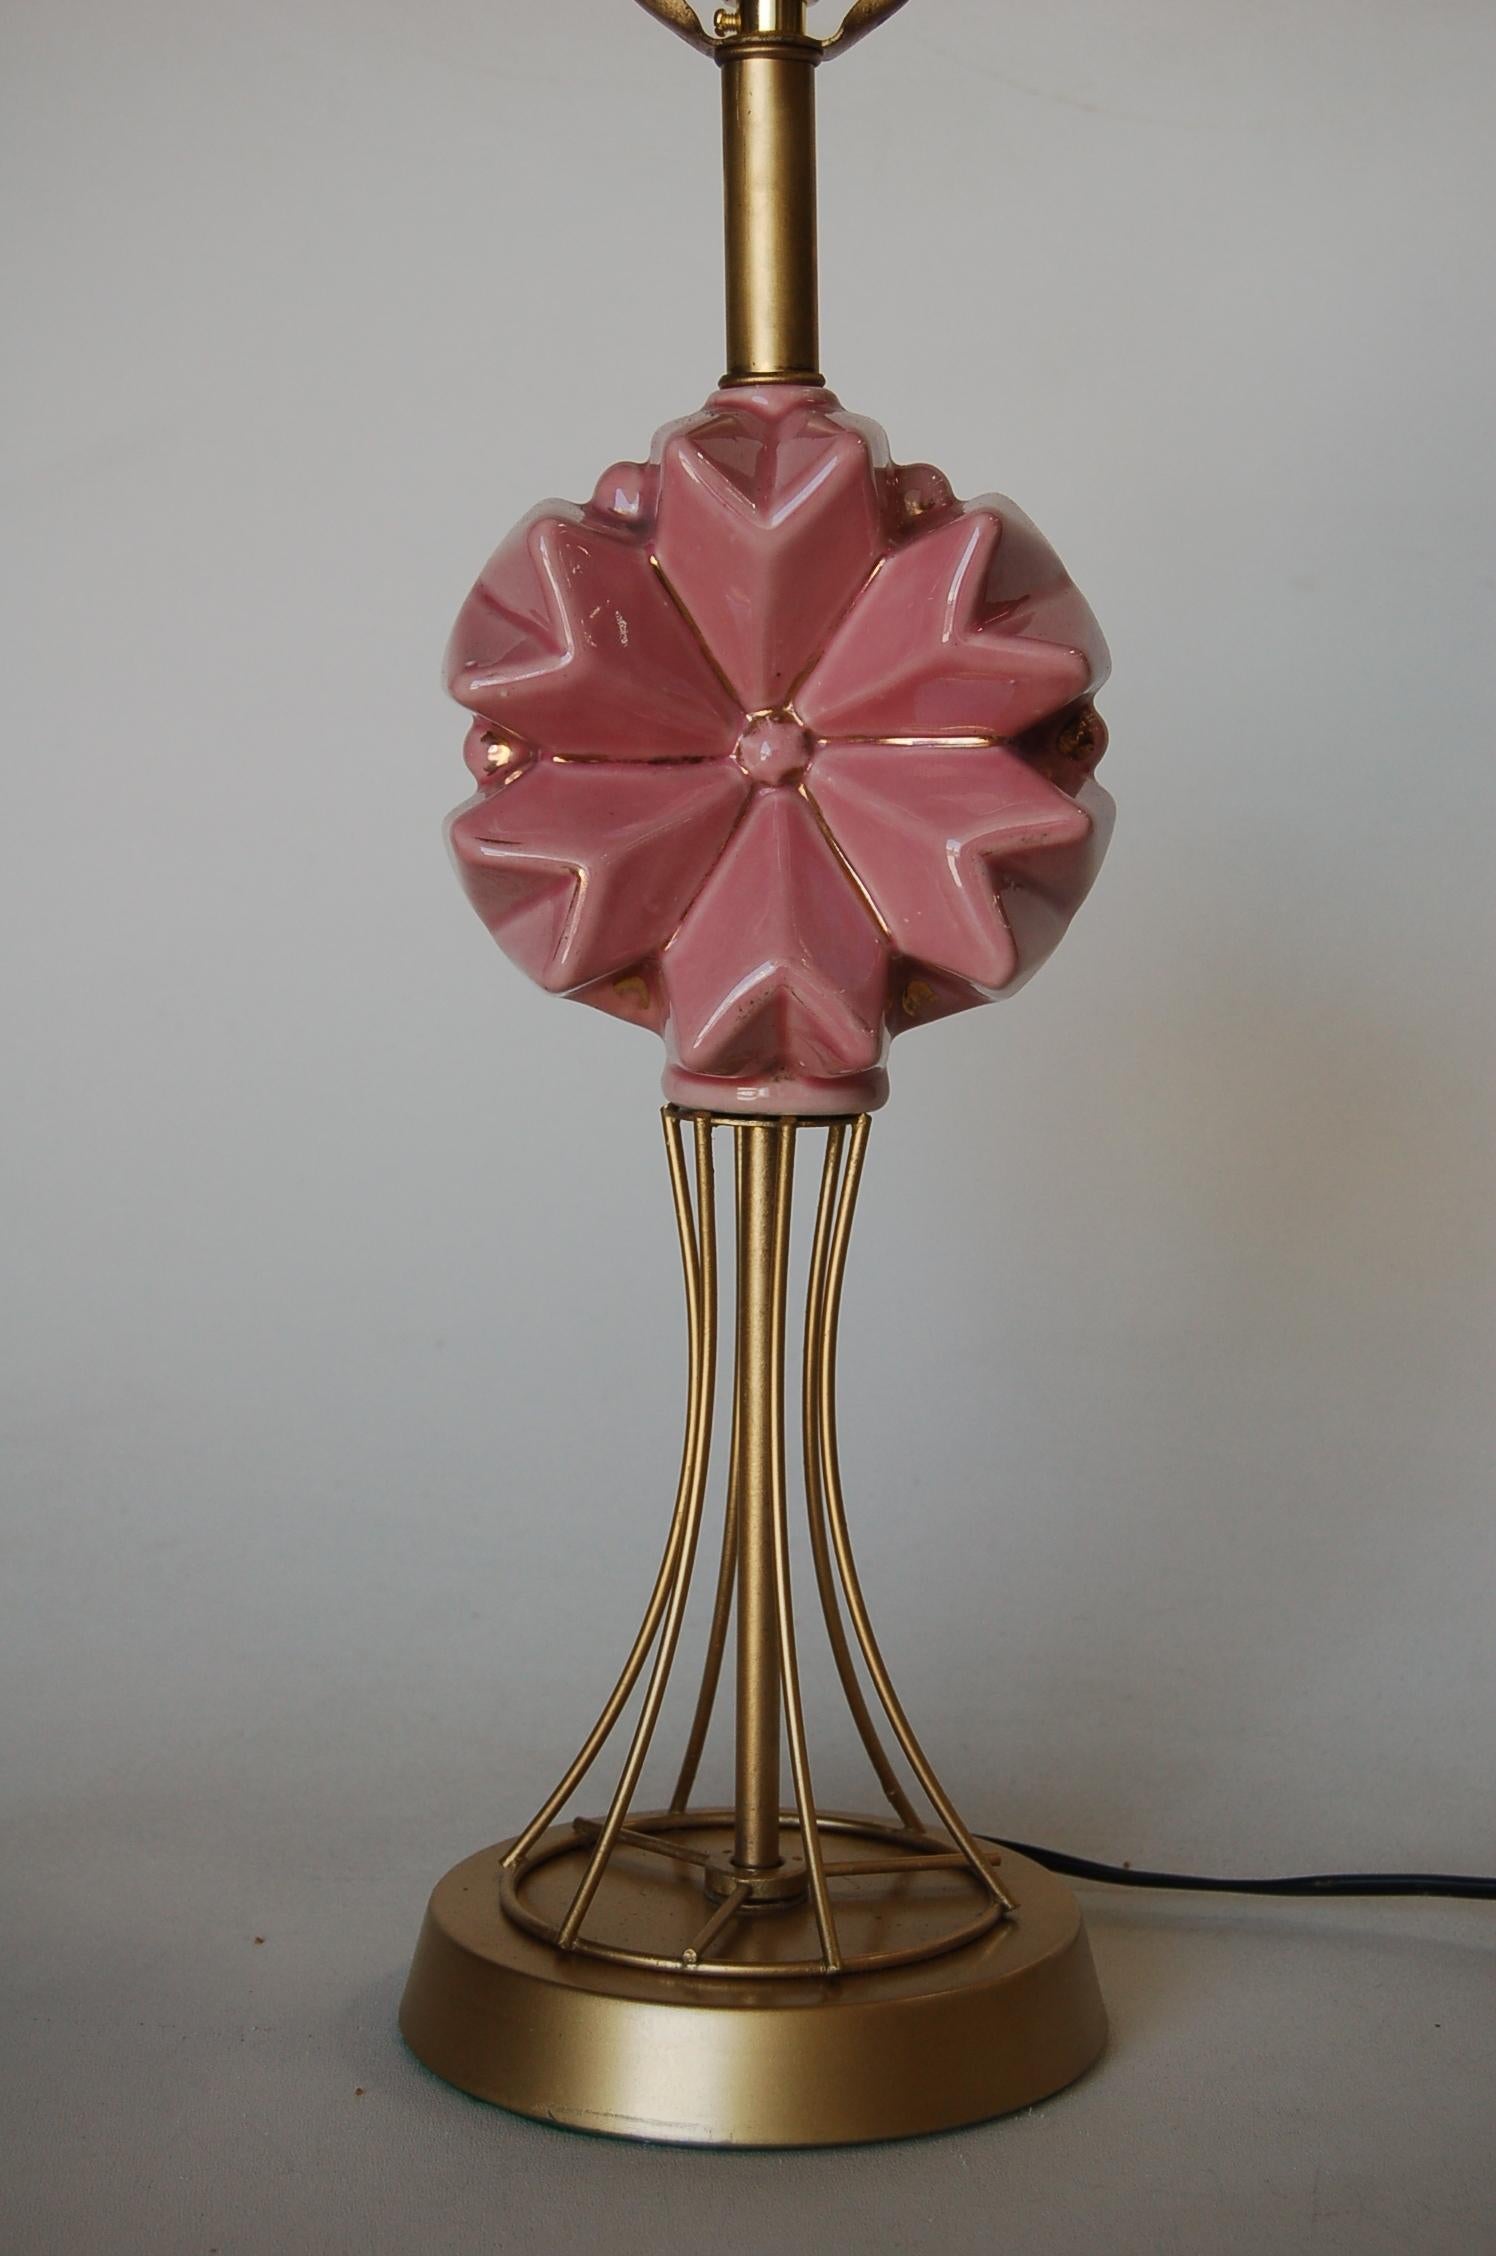 Original post war brass spindel brass table Lamp with pink ceramic flower accent as the center piece, 

Measures 19